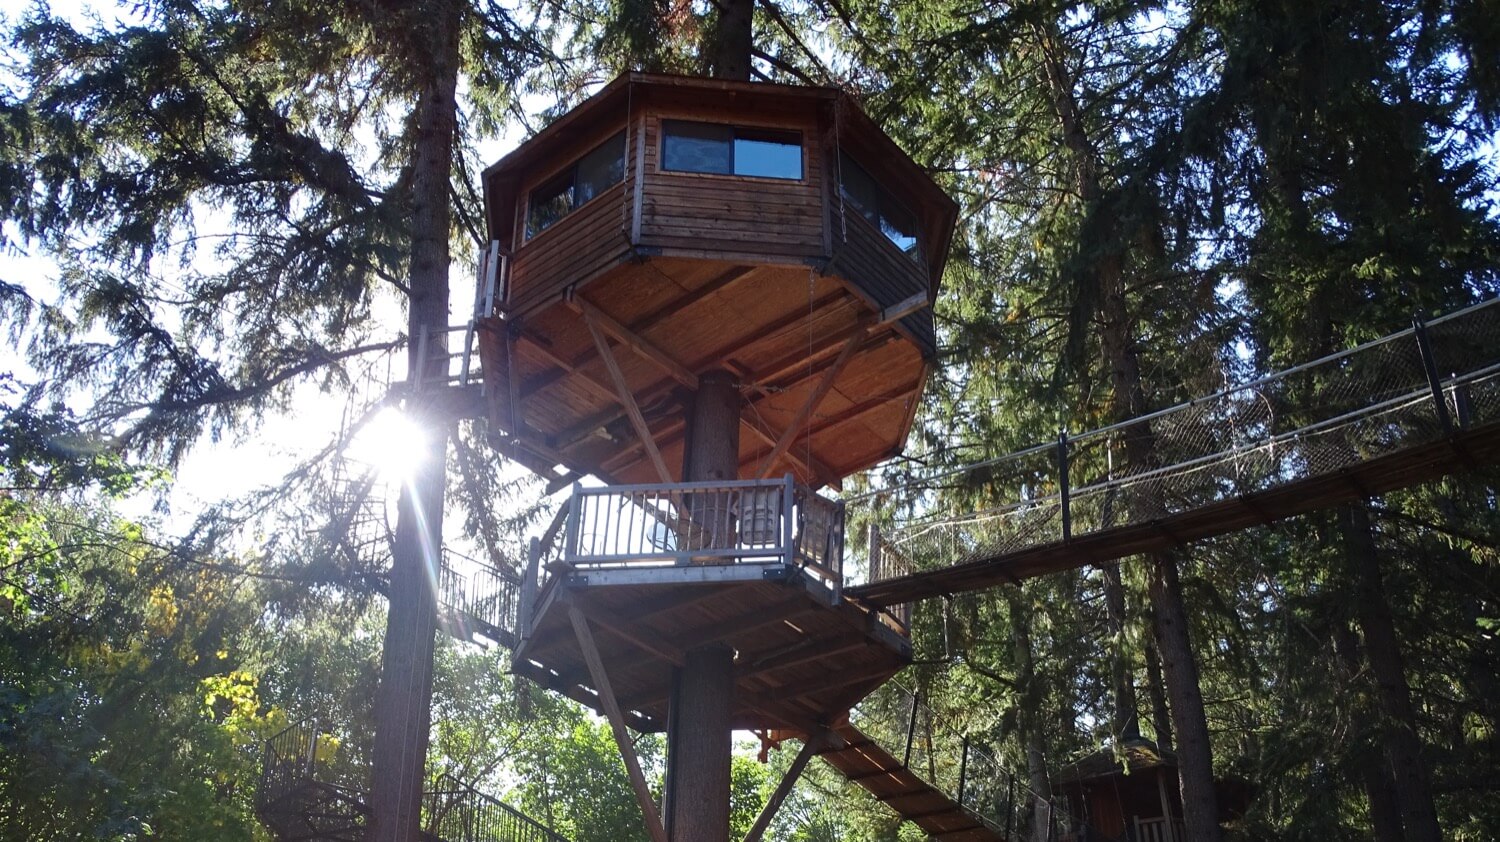 Tour of the tree houses built by the company Microsoft